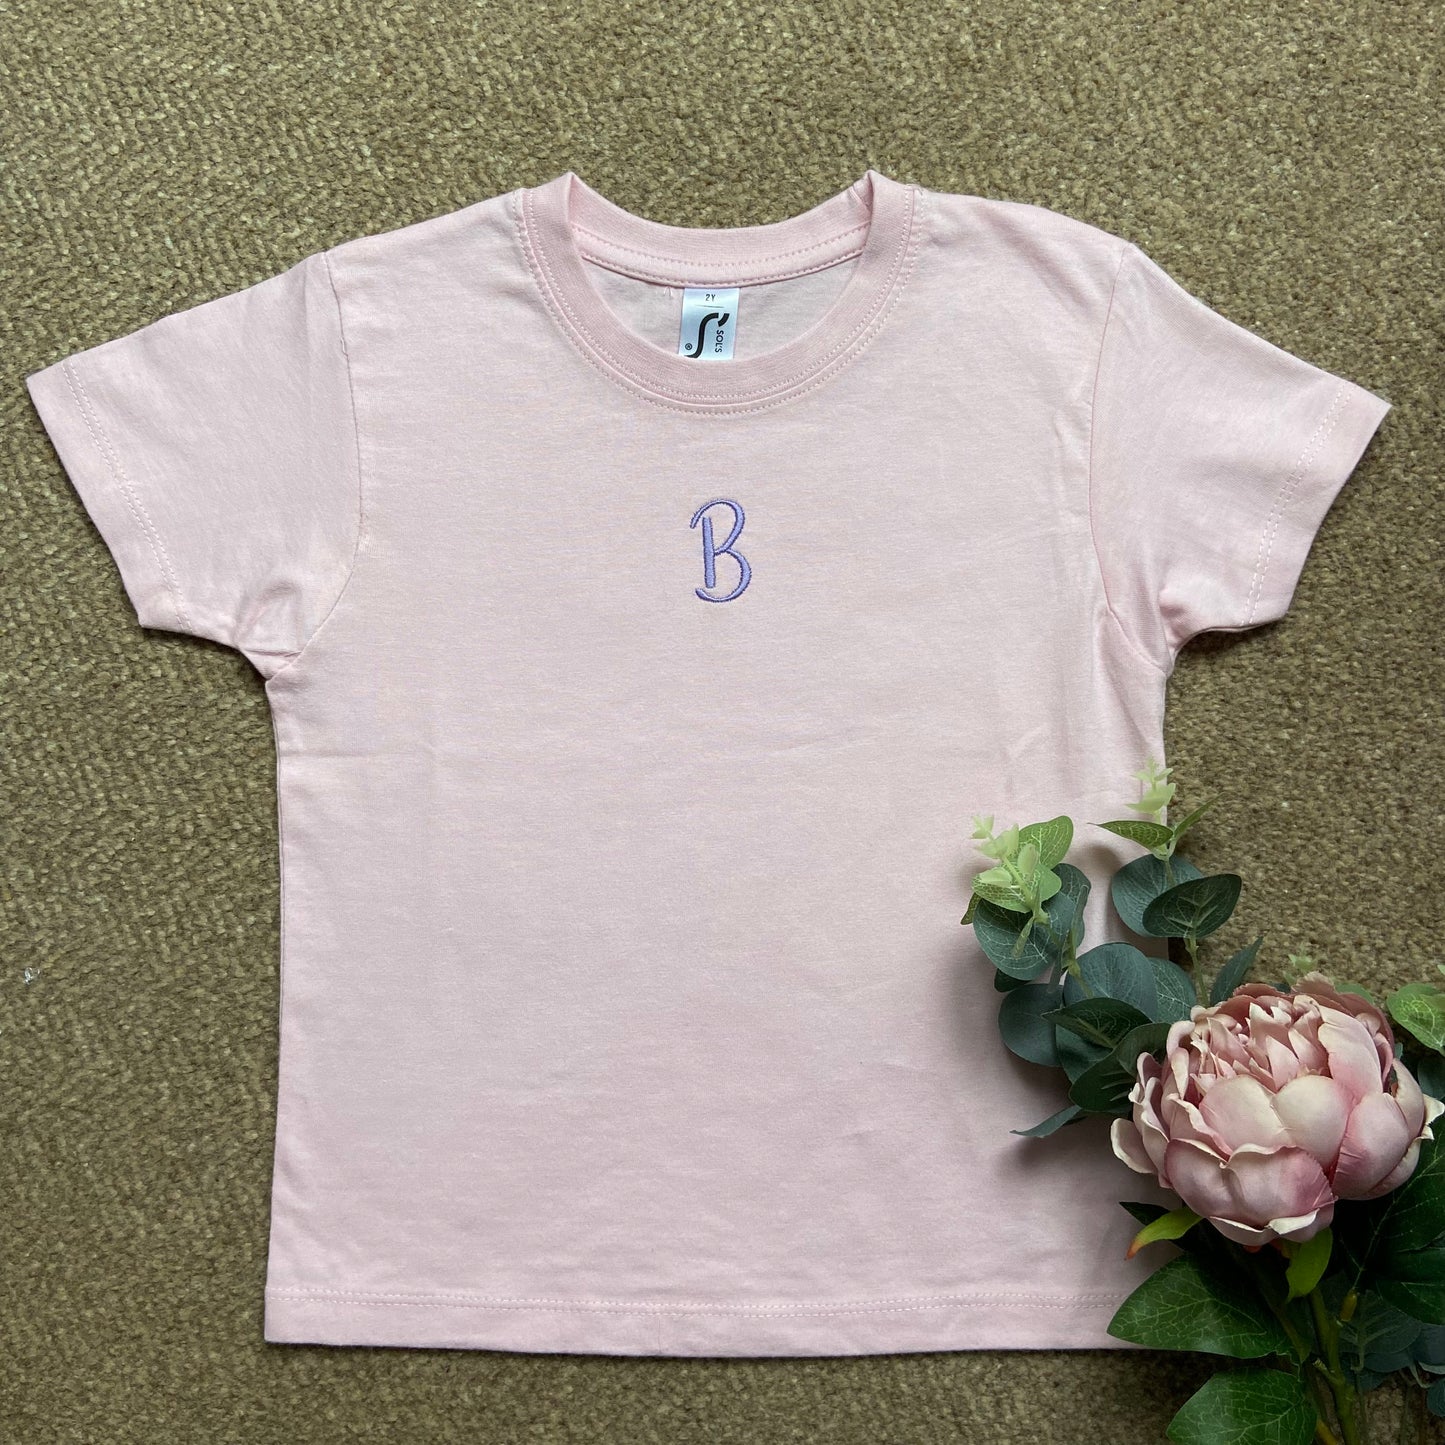 Embroidered Monogrammed Short Sleeve Kids Unisex T-Shirt. Age 2 -12 Years